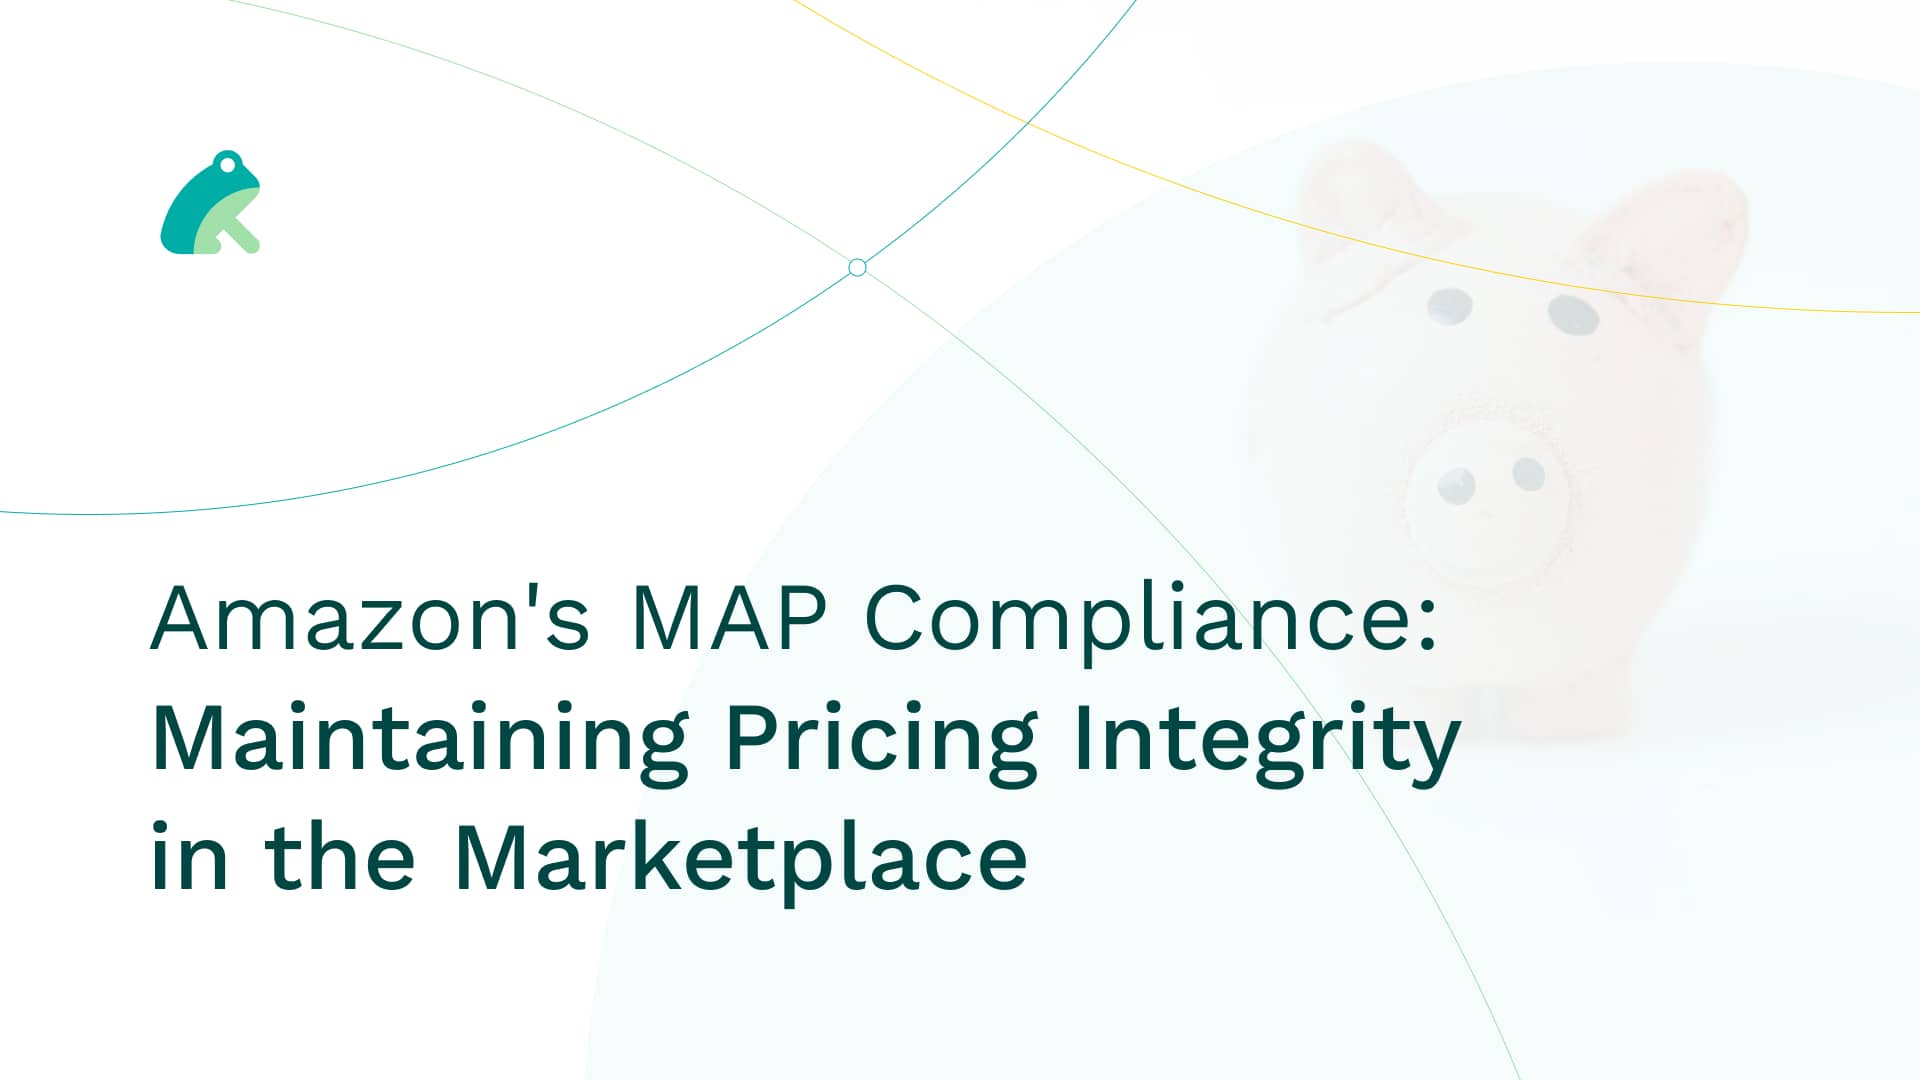 Amazon's MAP Compliance: Maintaining Pricing Integrity in the Marketplace